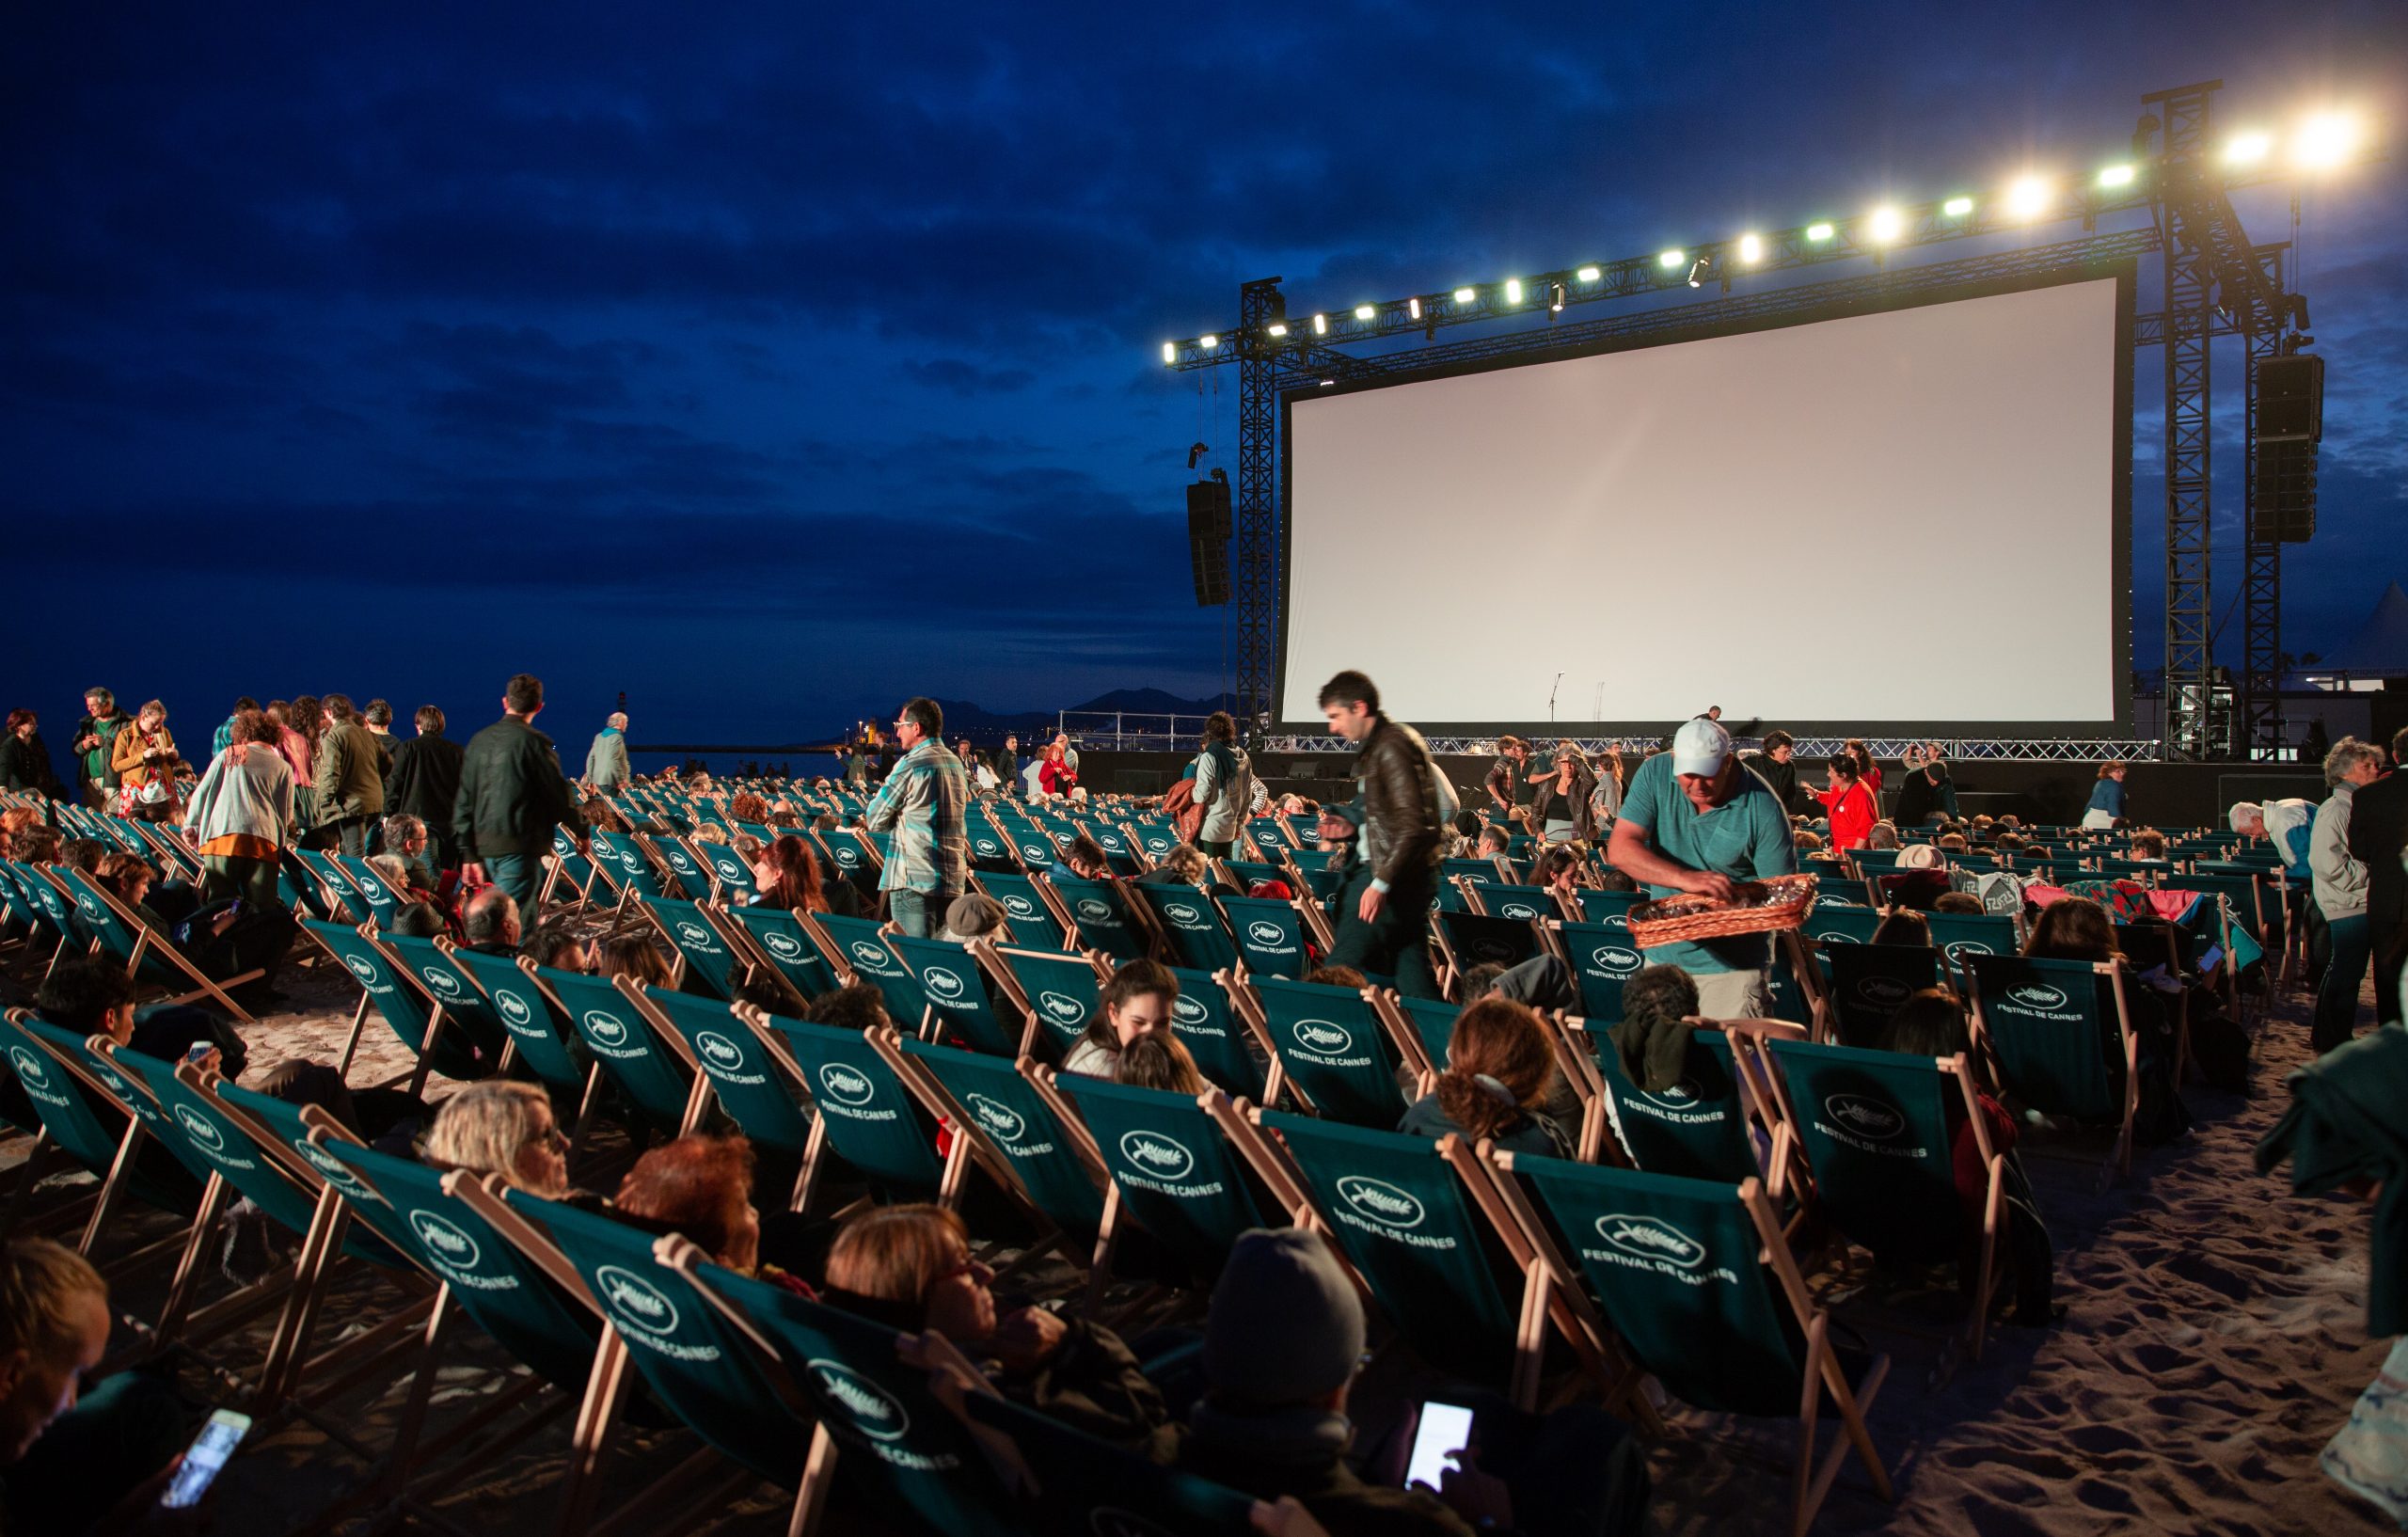 The Rooftop Film Club in Peckham and Stratford, London